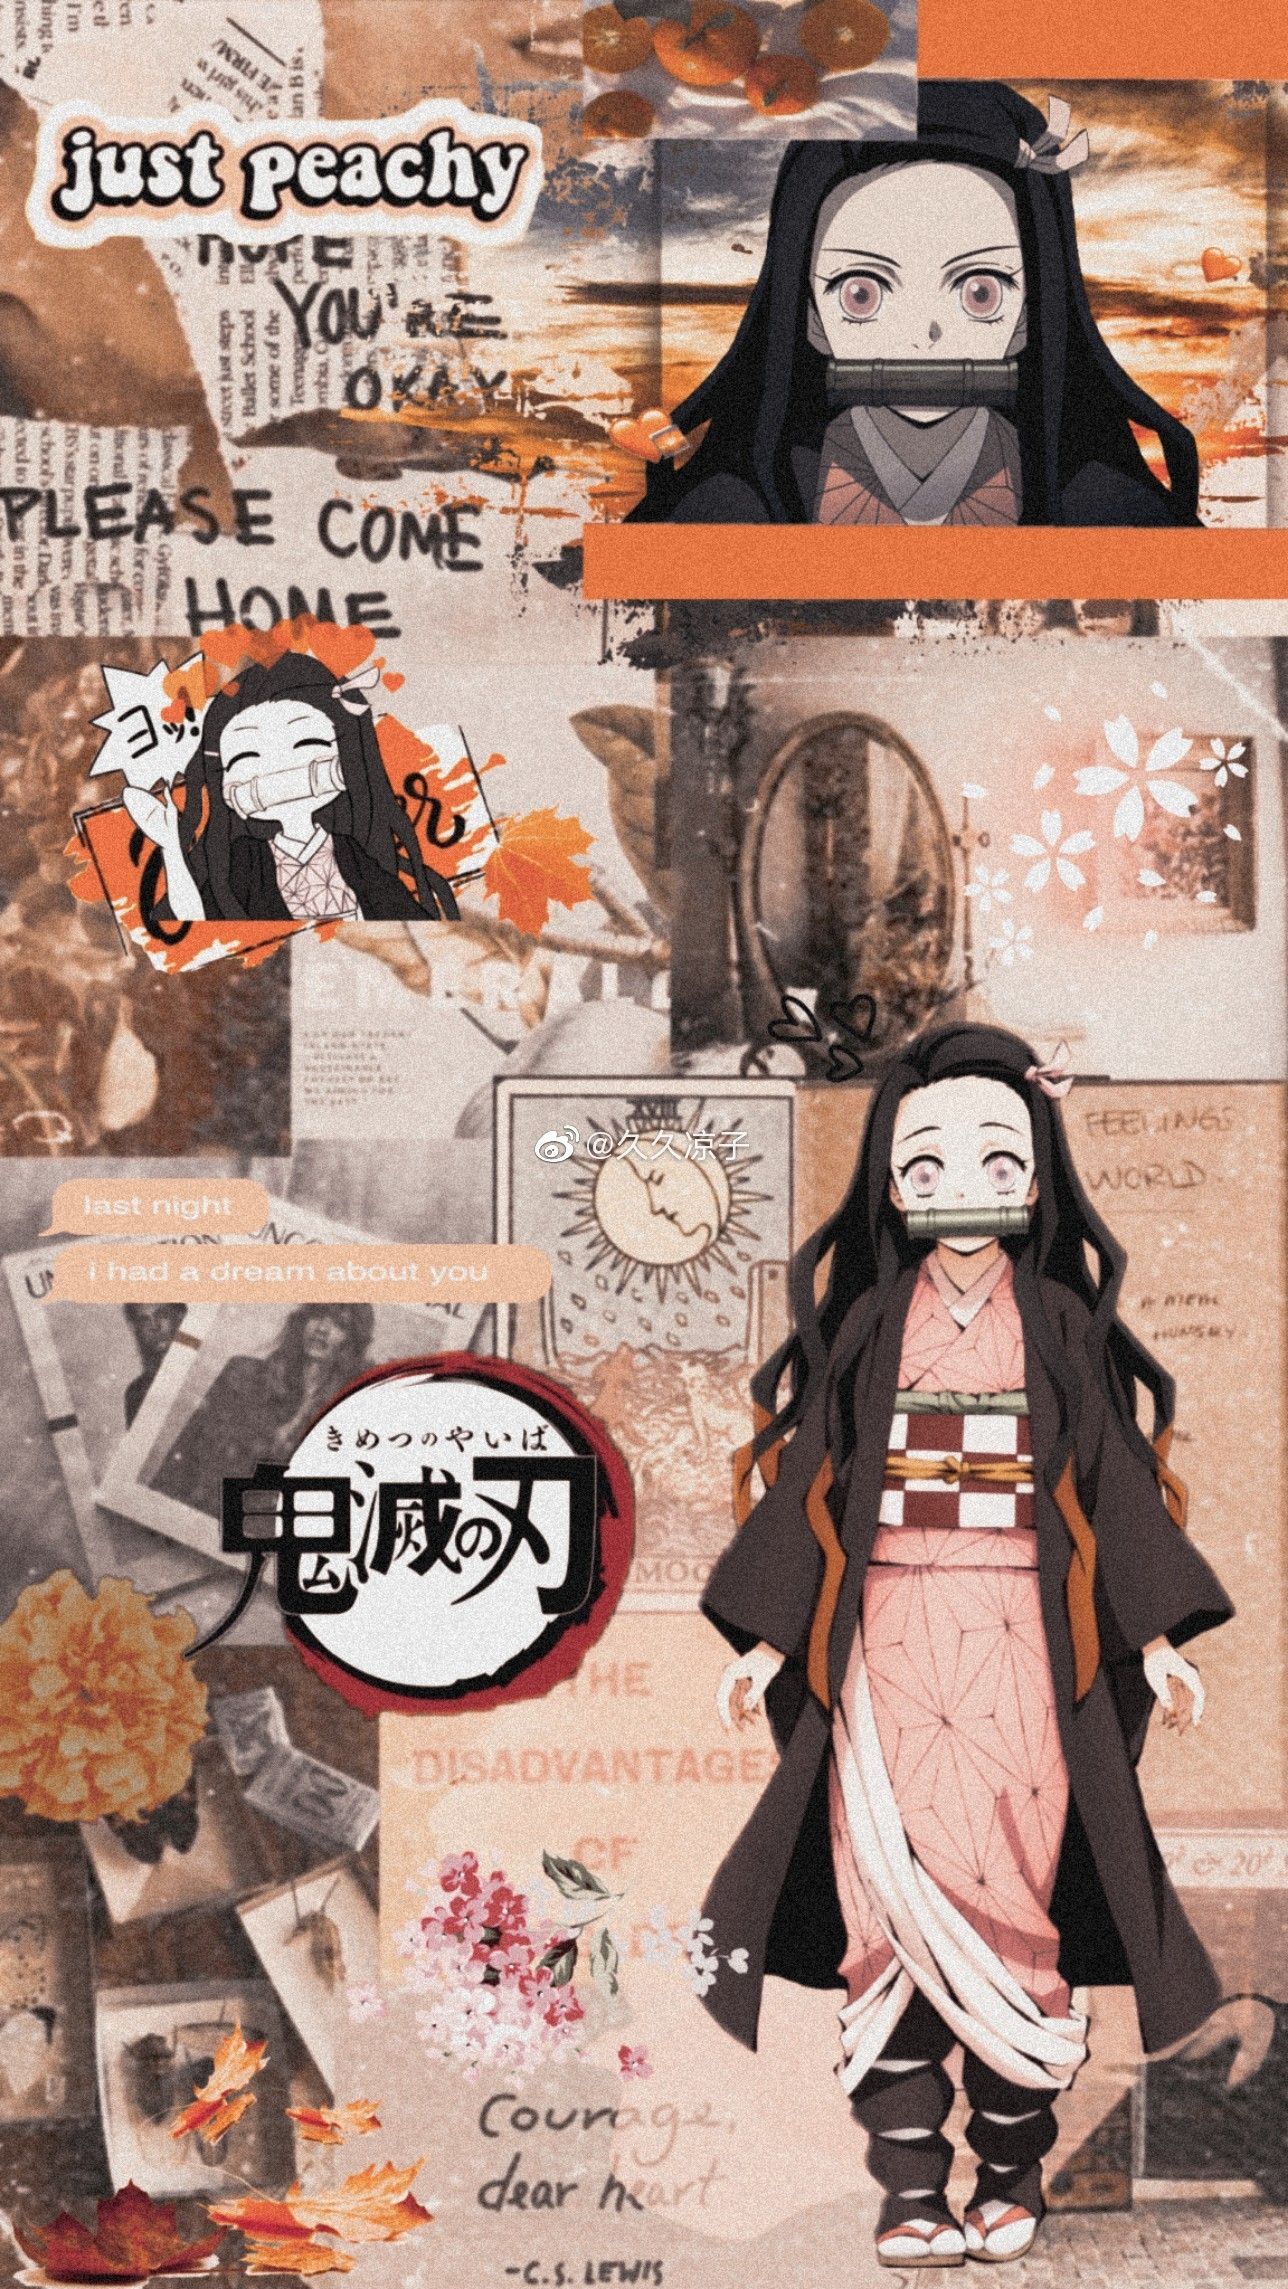 A collage of images with anime characters - Nezuko